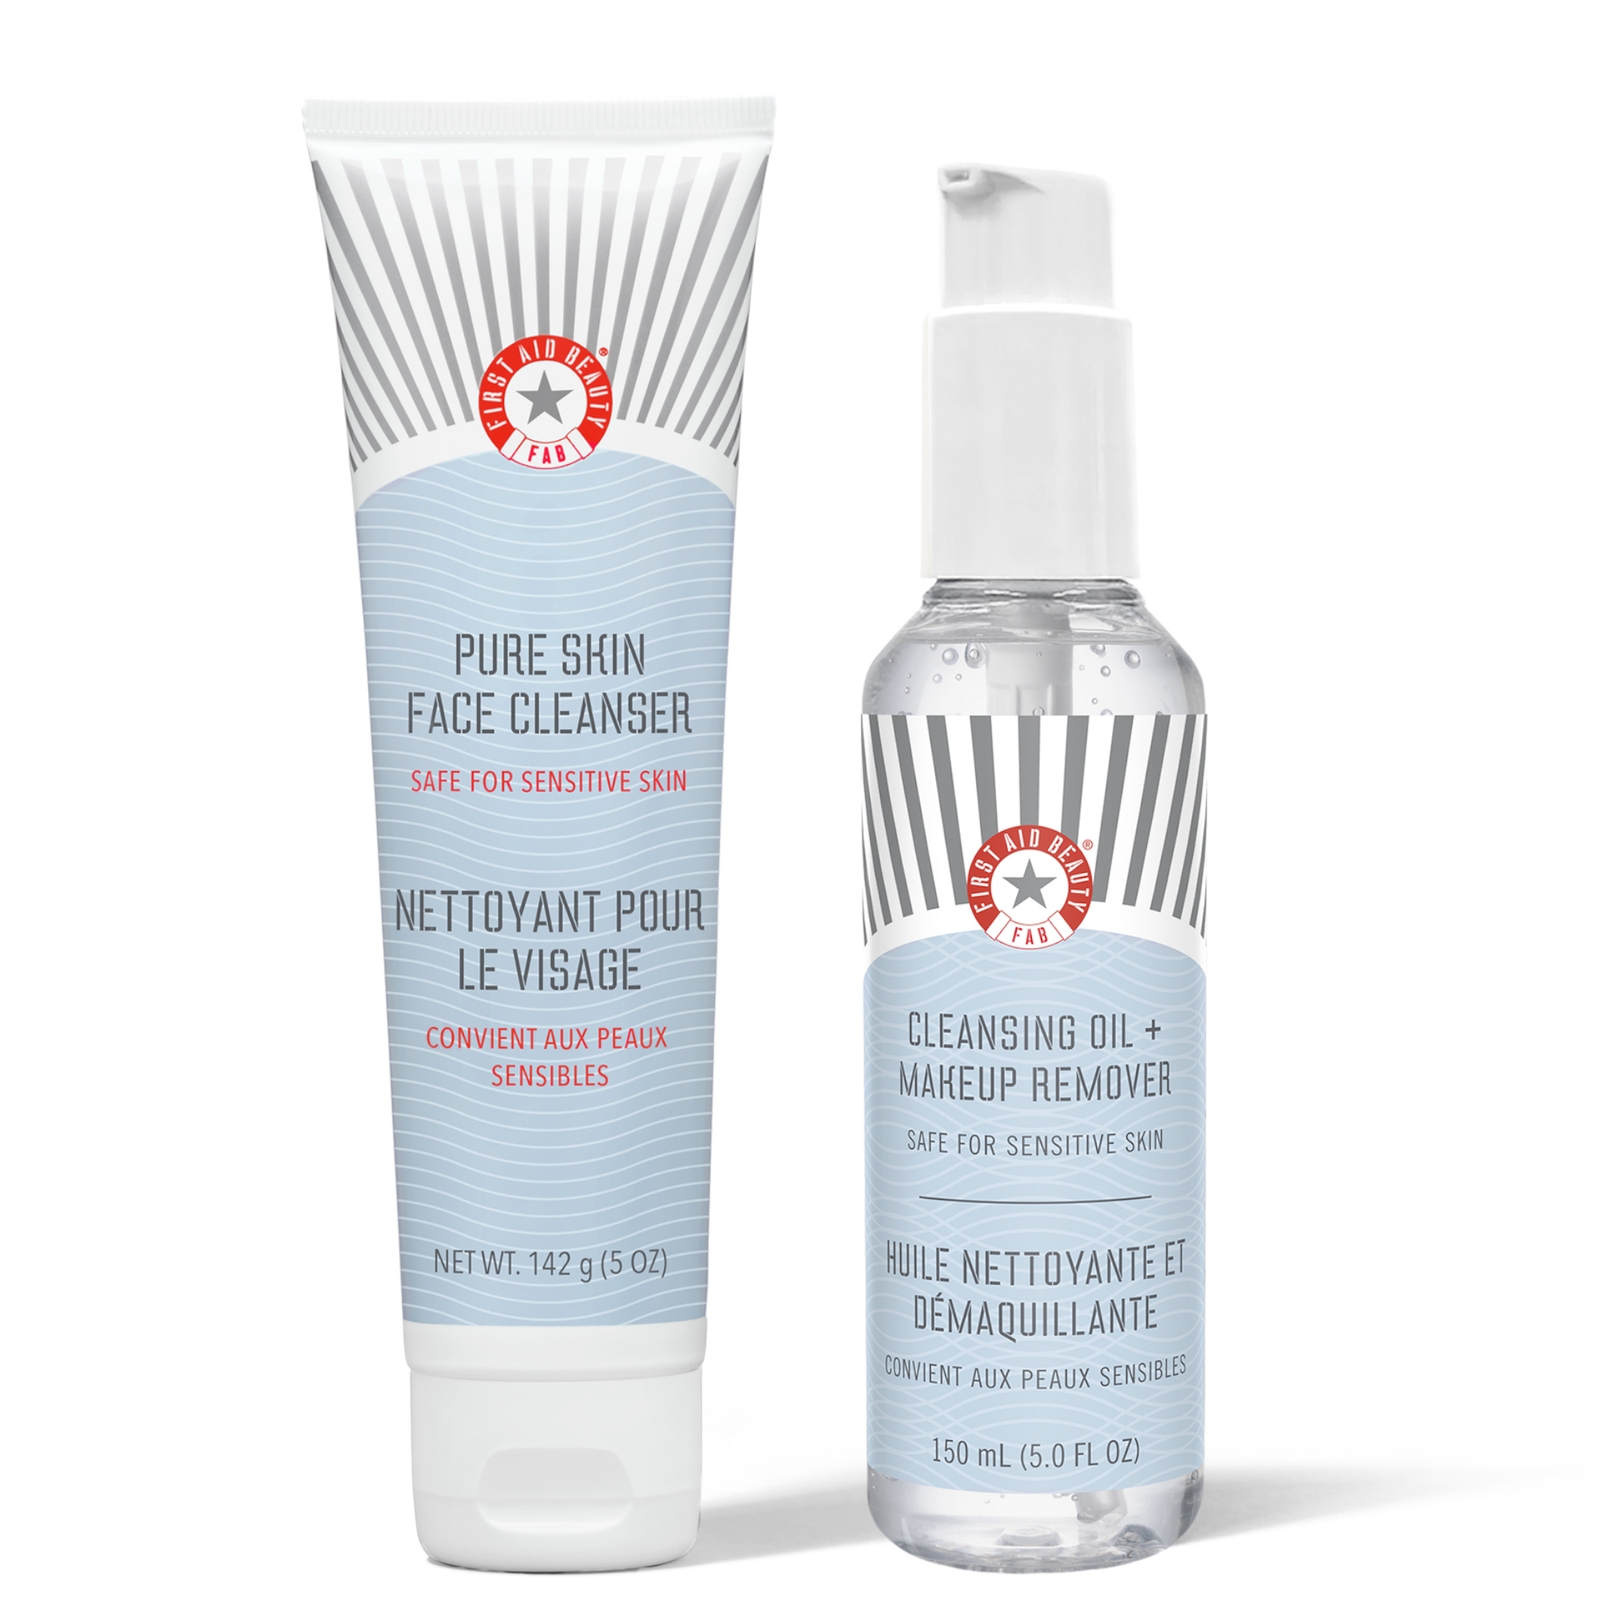 First Aid Beauty Double Cleanse Bundle